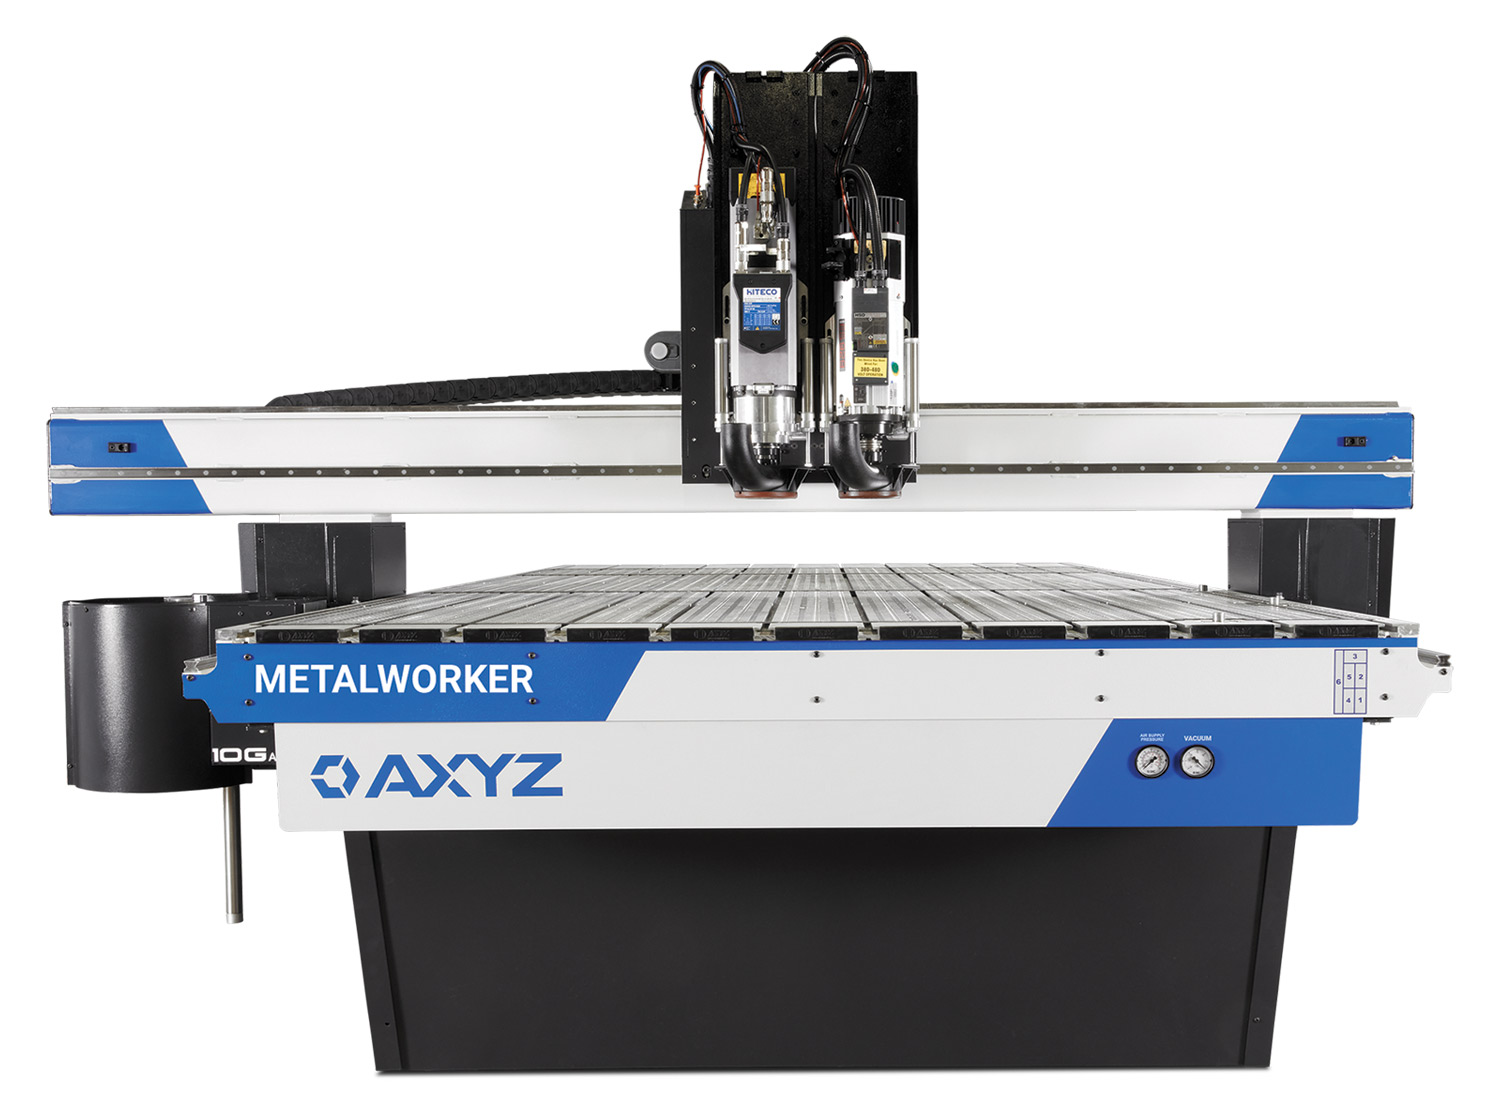 The Metalworker machine from AXYZ Tailored Router Solutions